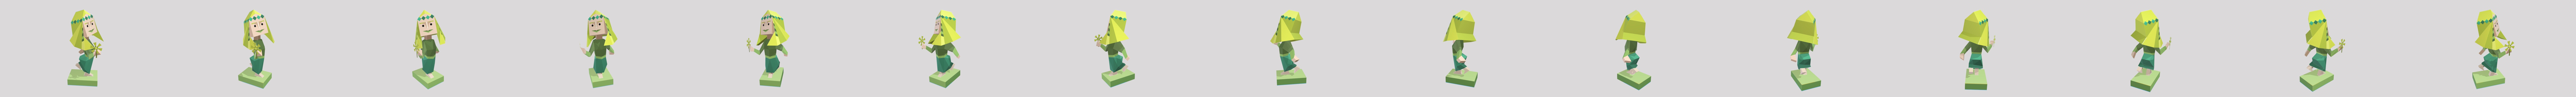 INFP Female Avatar Character papermodel, MBTI 16 Personalities Papercraft  Low Poly Pdf Templates - toscraft's Ko-fi Shop - Ko-fi ❤️ Where creators  get support from fans through donations, memberships, shop sales and